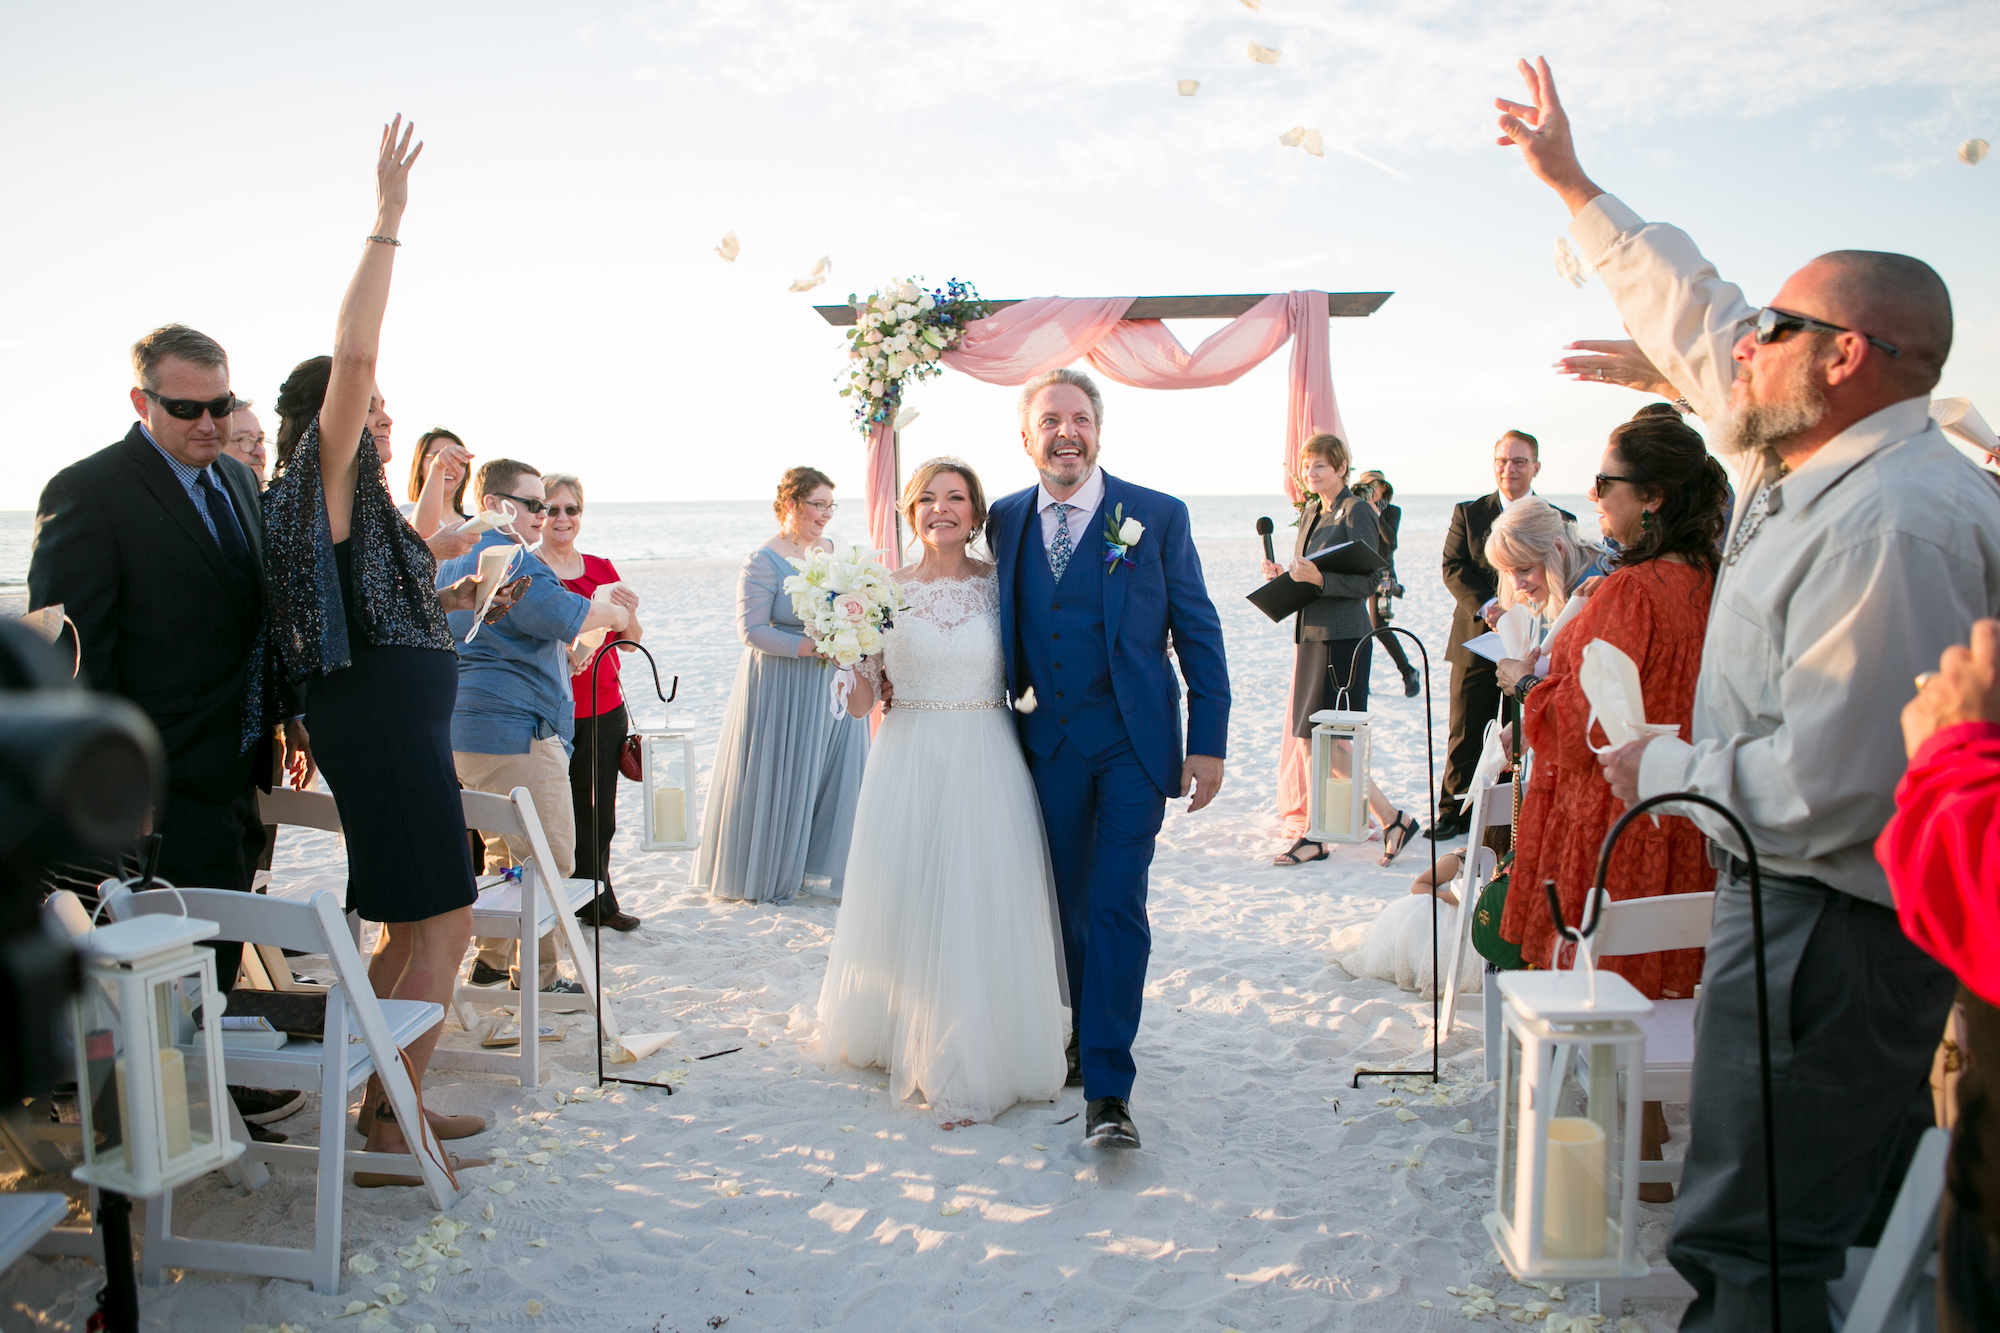 Classic Bride and Groom Exiting Wedding Ceremony Portrait, Guests Throwing Rose Petals | Tampa Bay Wedding Photographer Carrie Wildes Photography | Wedding Planner Breezin' Weddings